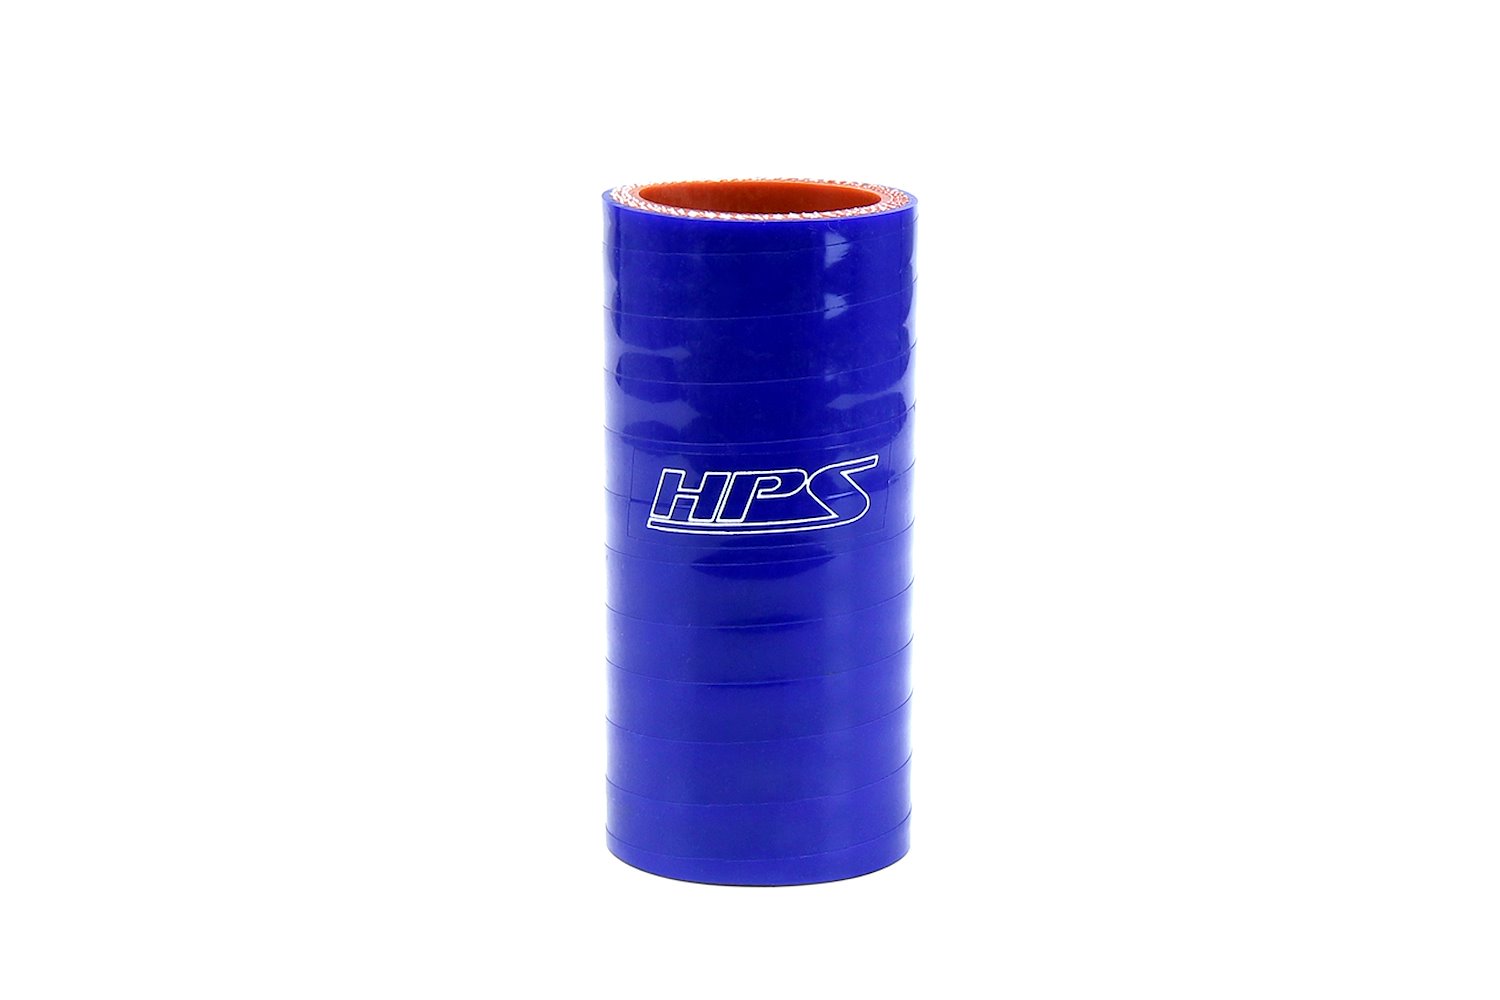 HTSC-100-L6-BLUE Silicone Coupler Hose, High-Temp 4-Ply Reinforced, 1 in. ID, 6 in. Long, Blue